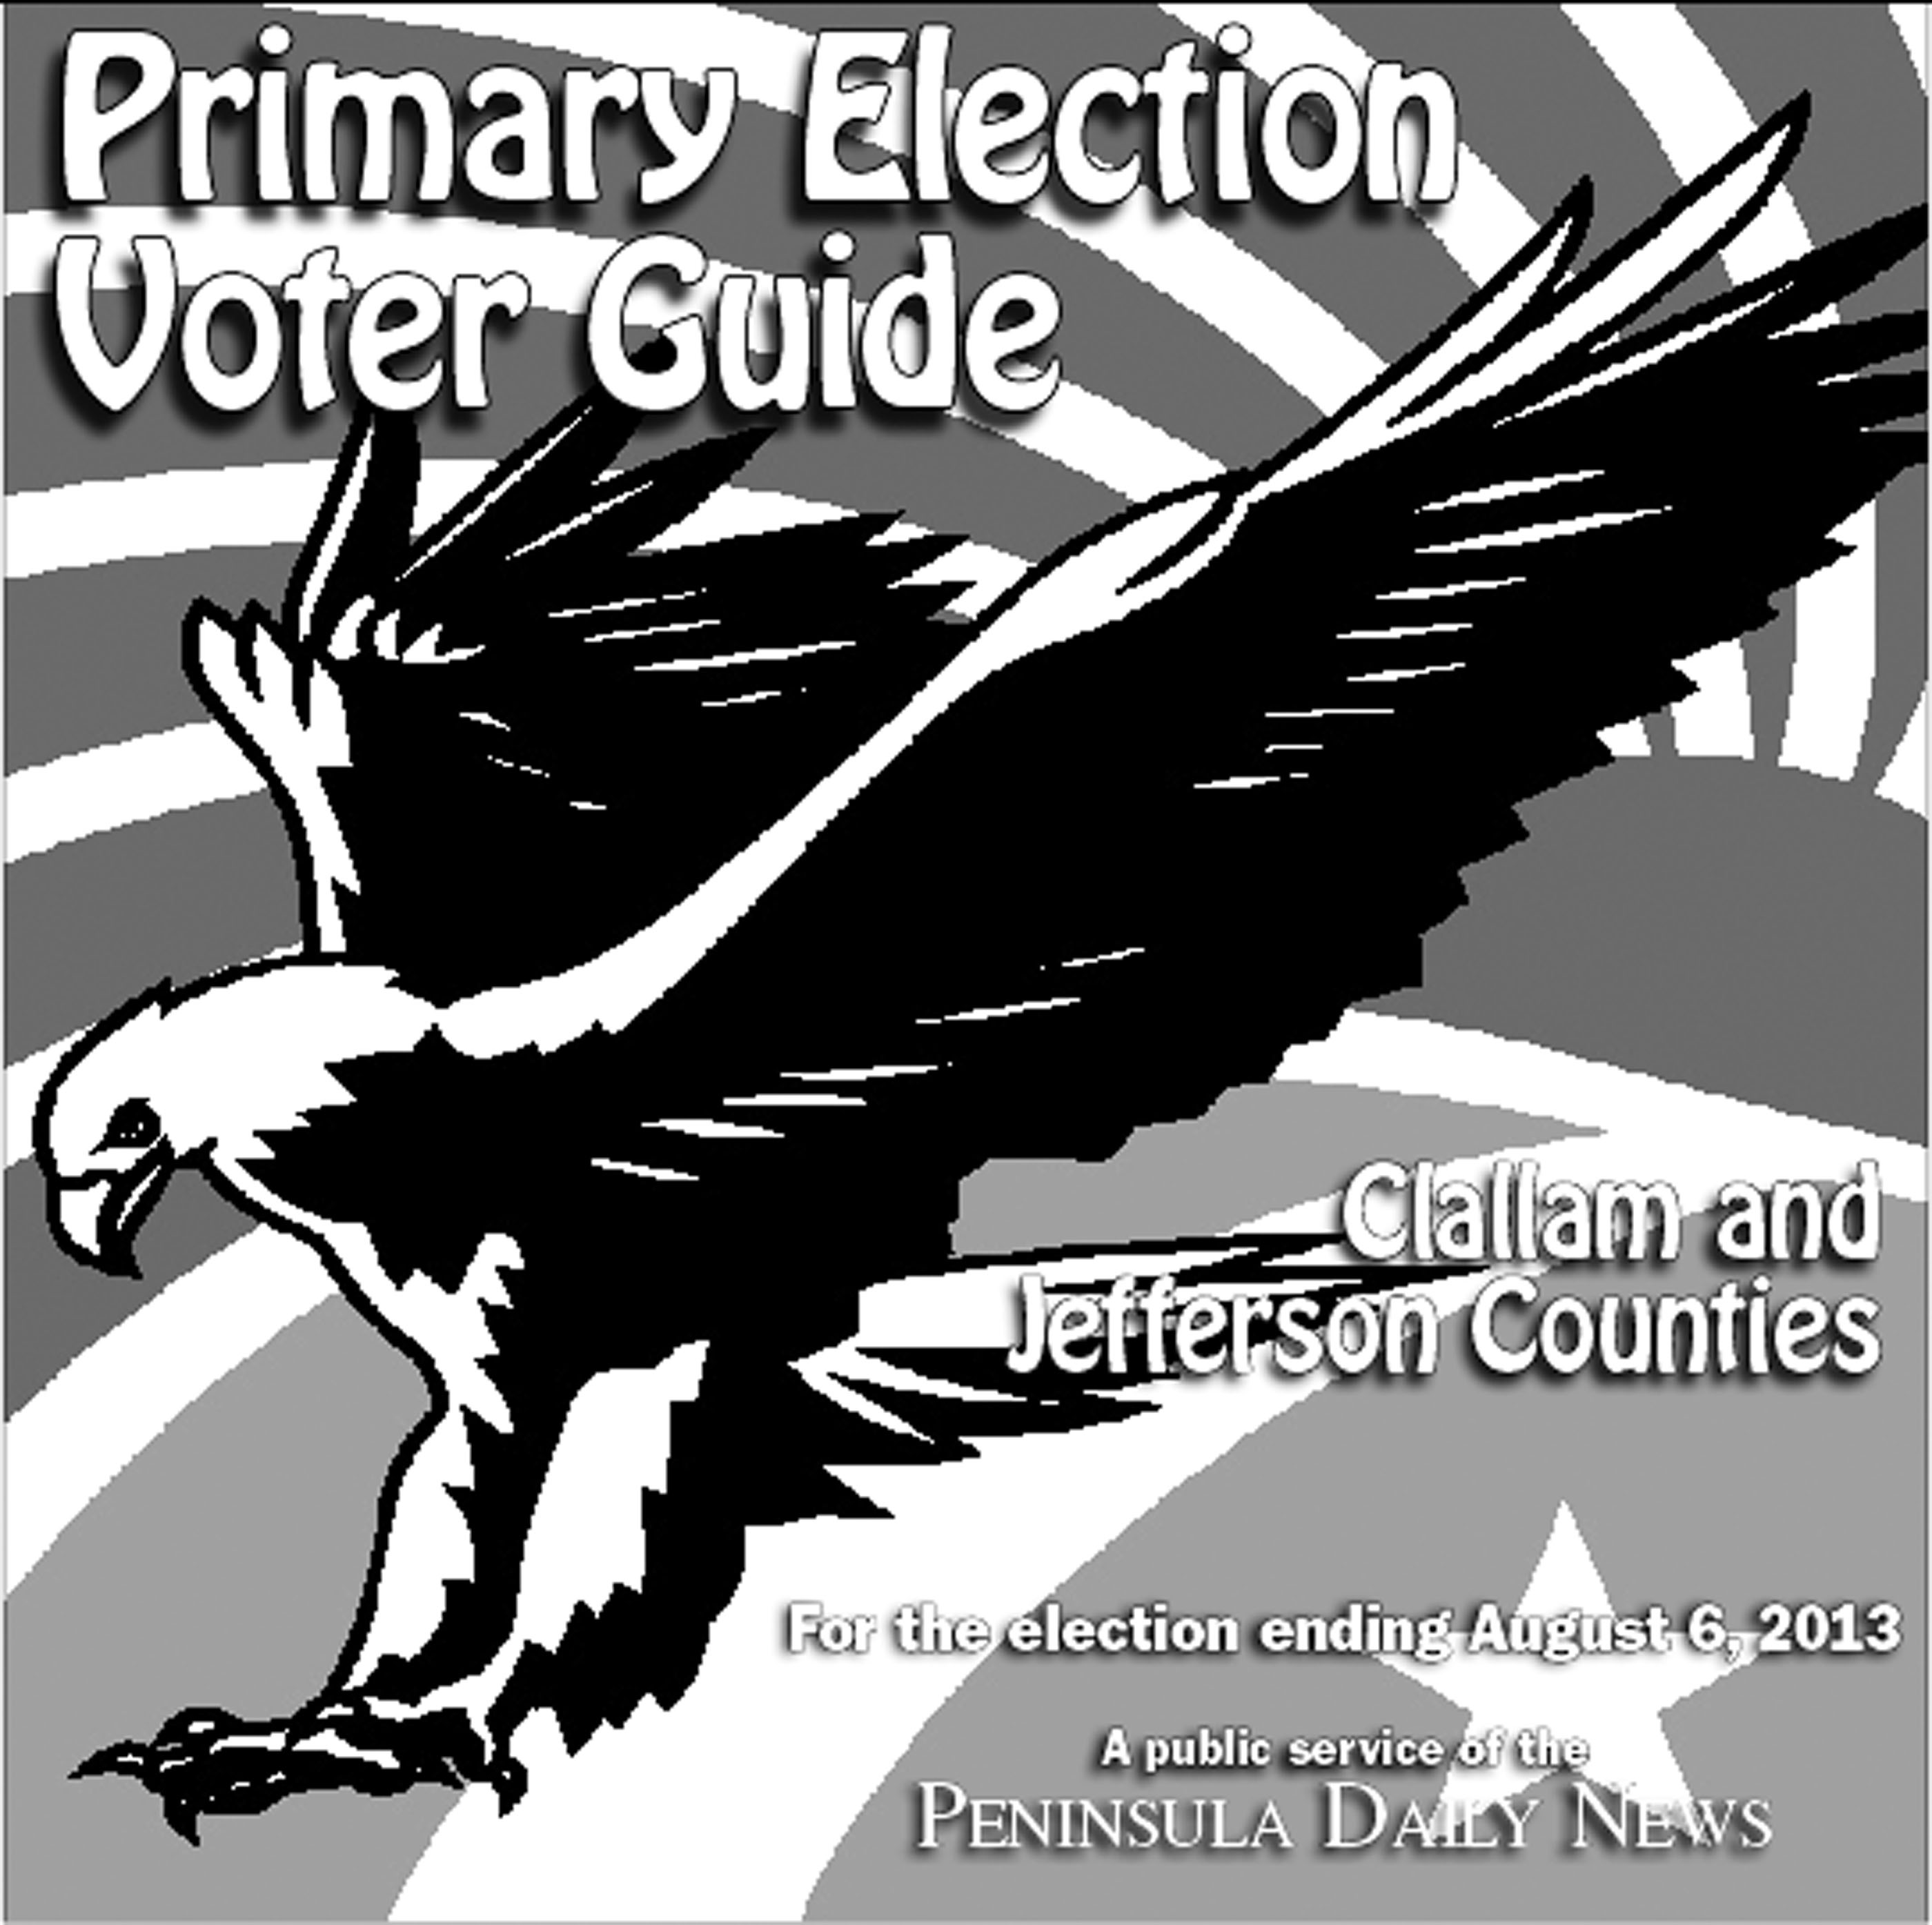 North Olympic Peninsula Primary Election Voter Guide out tomorrow